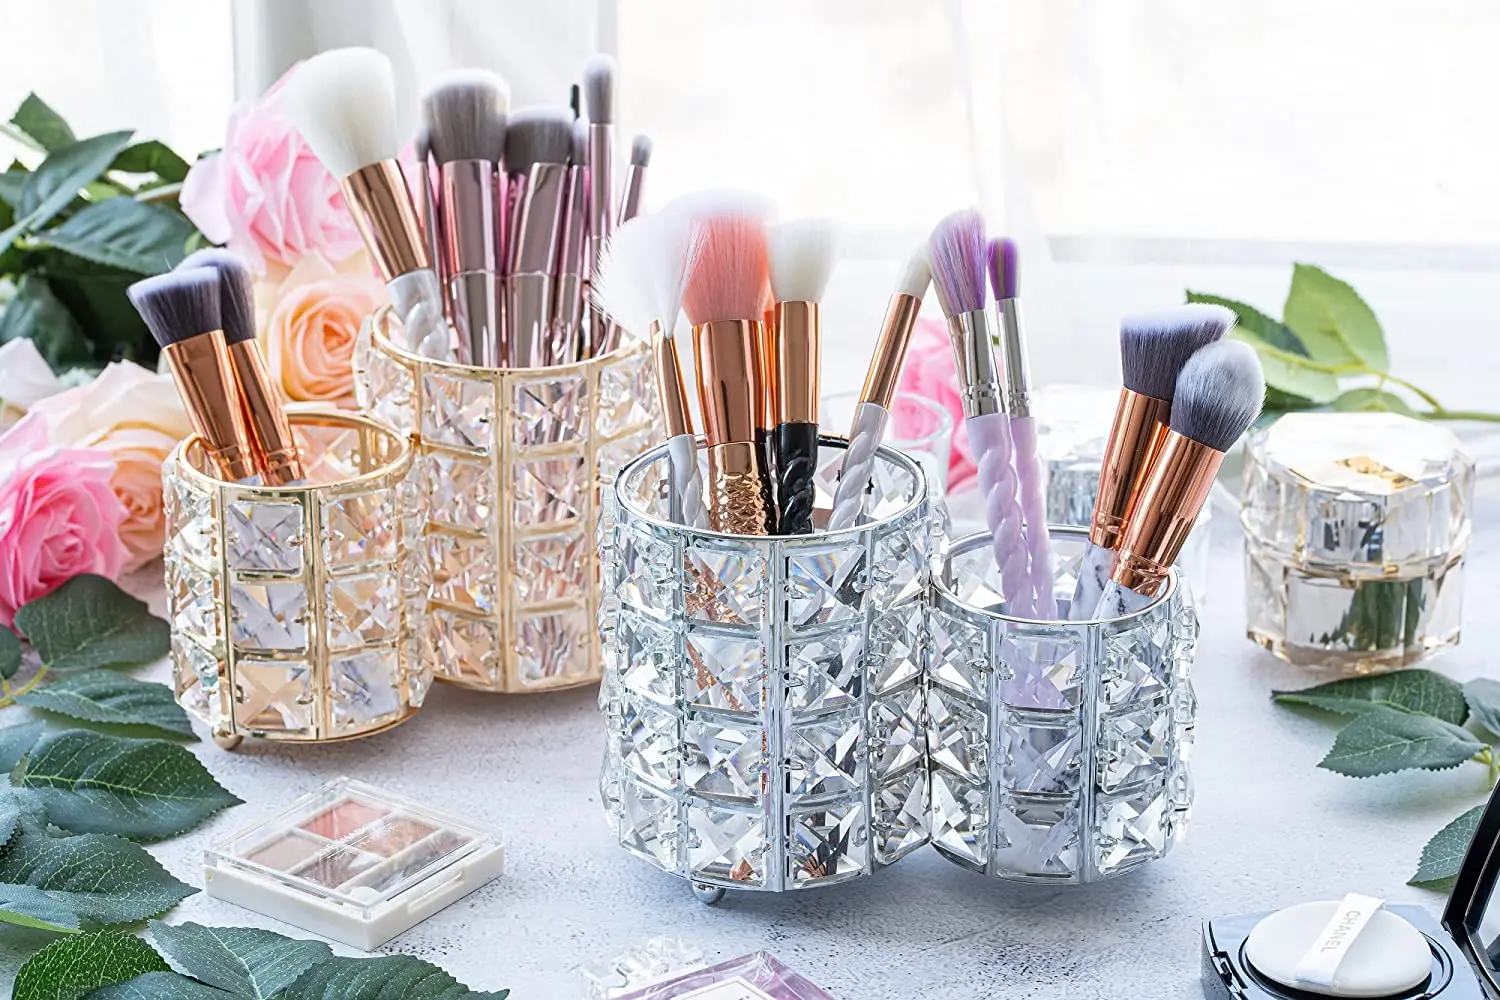 New Arrival Cosmetic Tools Organizer Container Makeup Set Storage Makeup  Brush Organizer Crystal Brush Holder - Buy Handcrafted Makeup Brush Holder